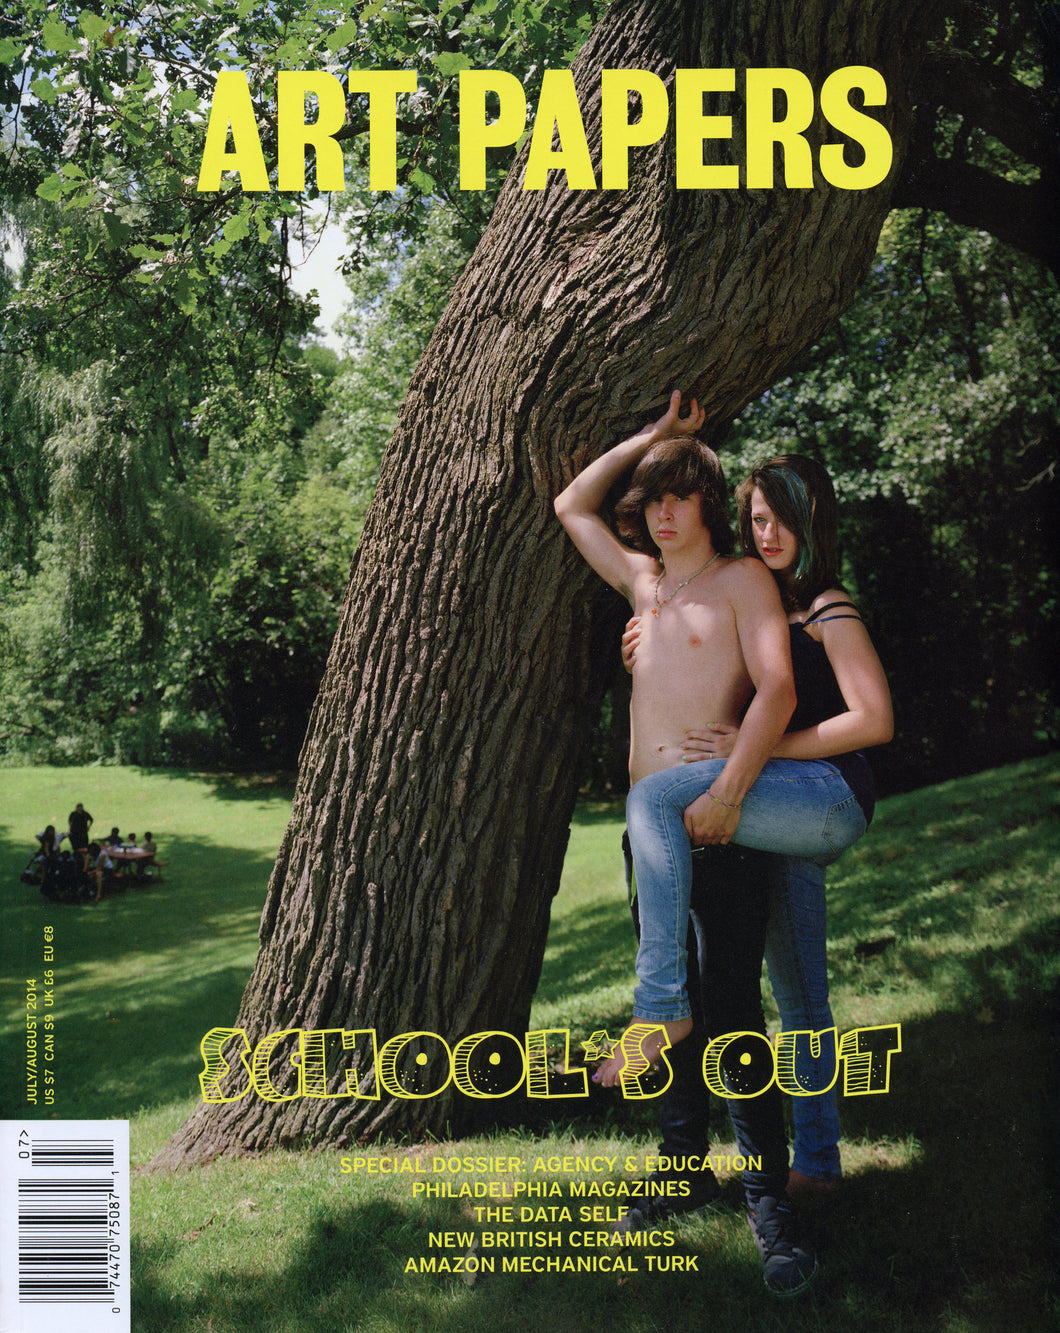 ART PAPERS 38.04 - July/Aug 2014